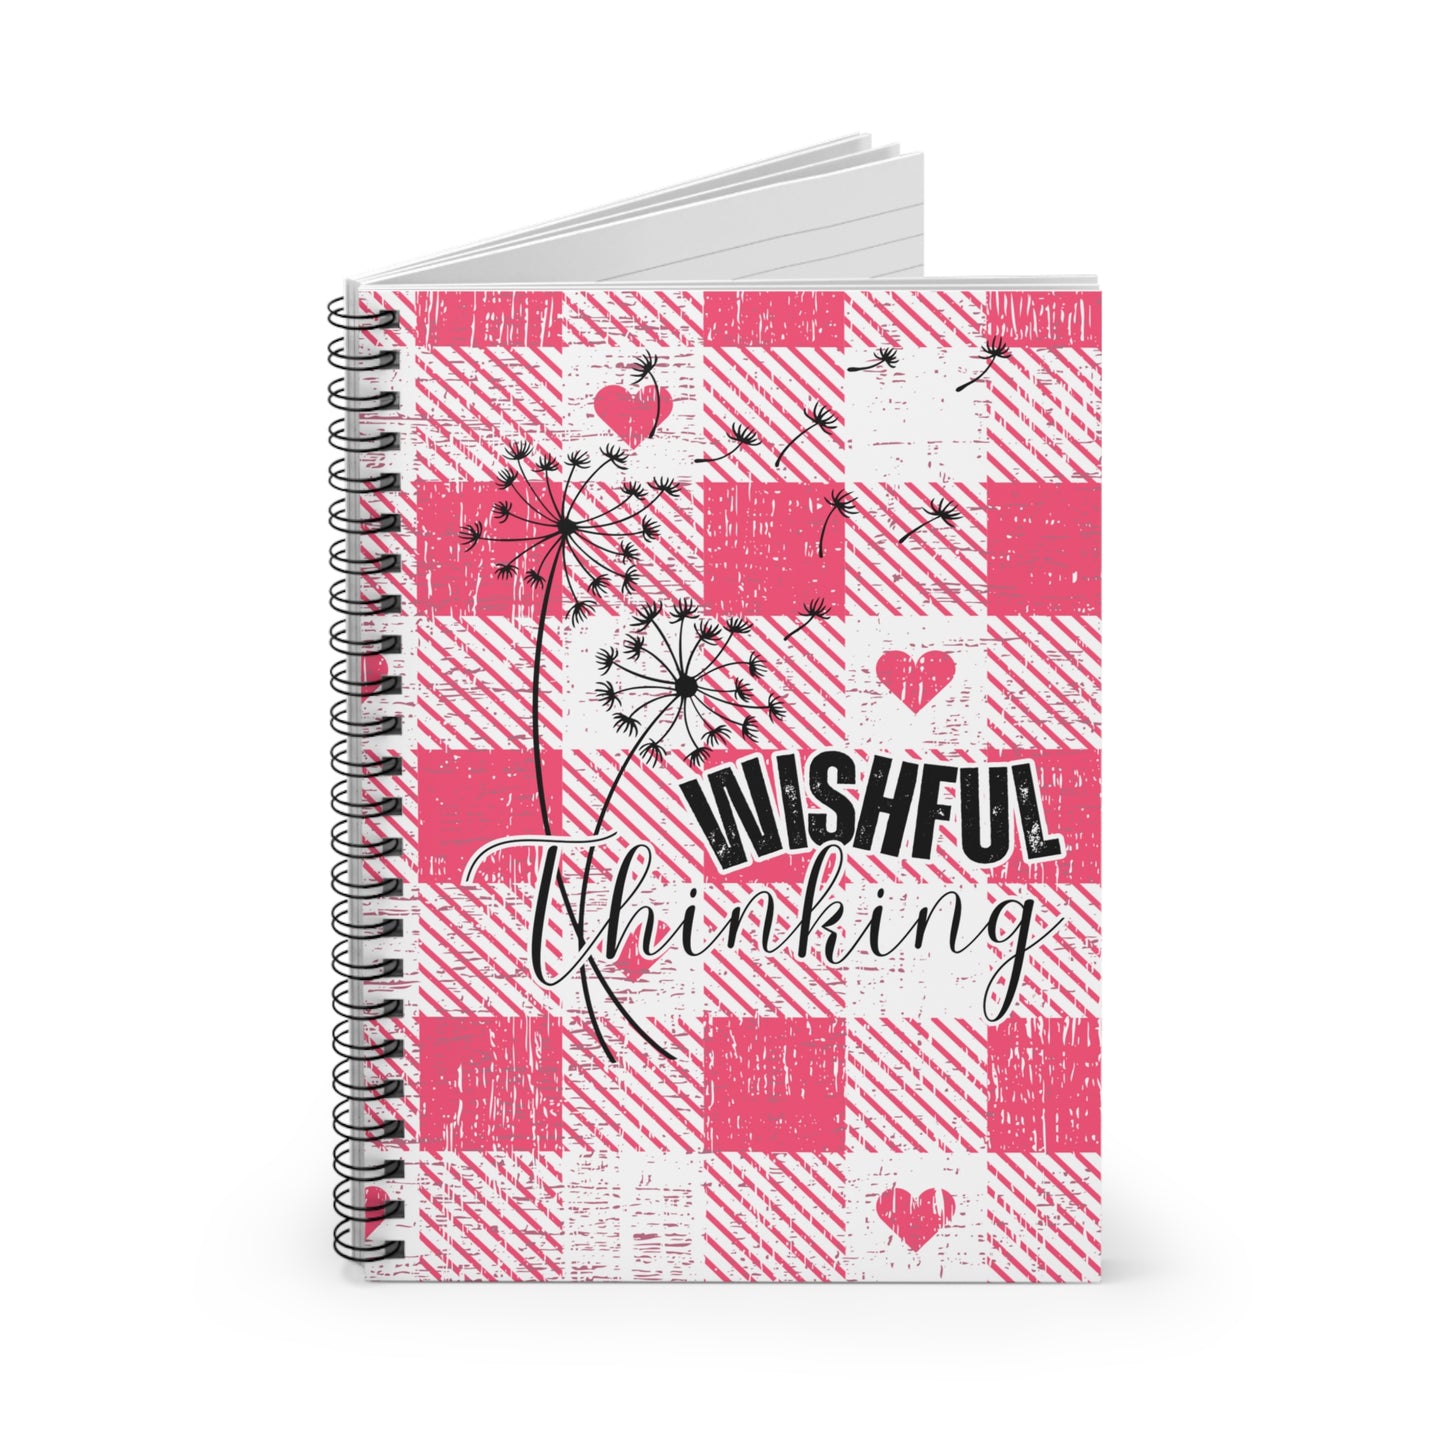 Wishful Thinking Pink Plaid Spiral Notebook - Ruled Line for Journaling and Note-Taking - Eddy and Rita